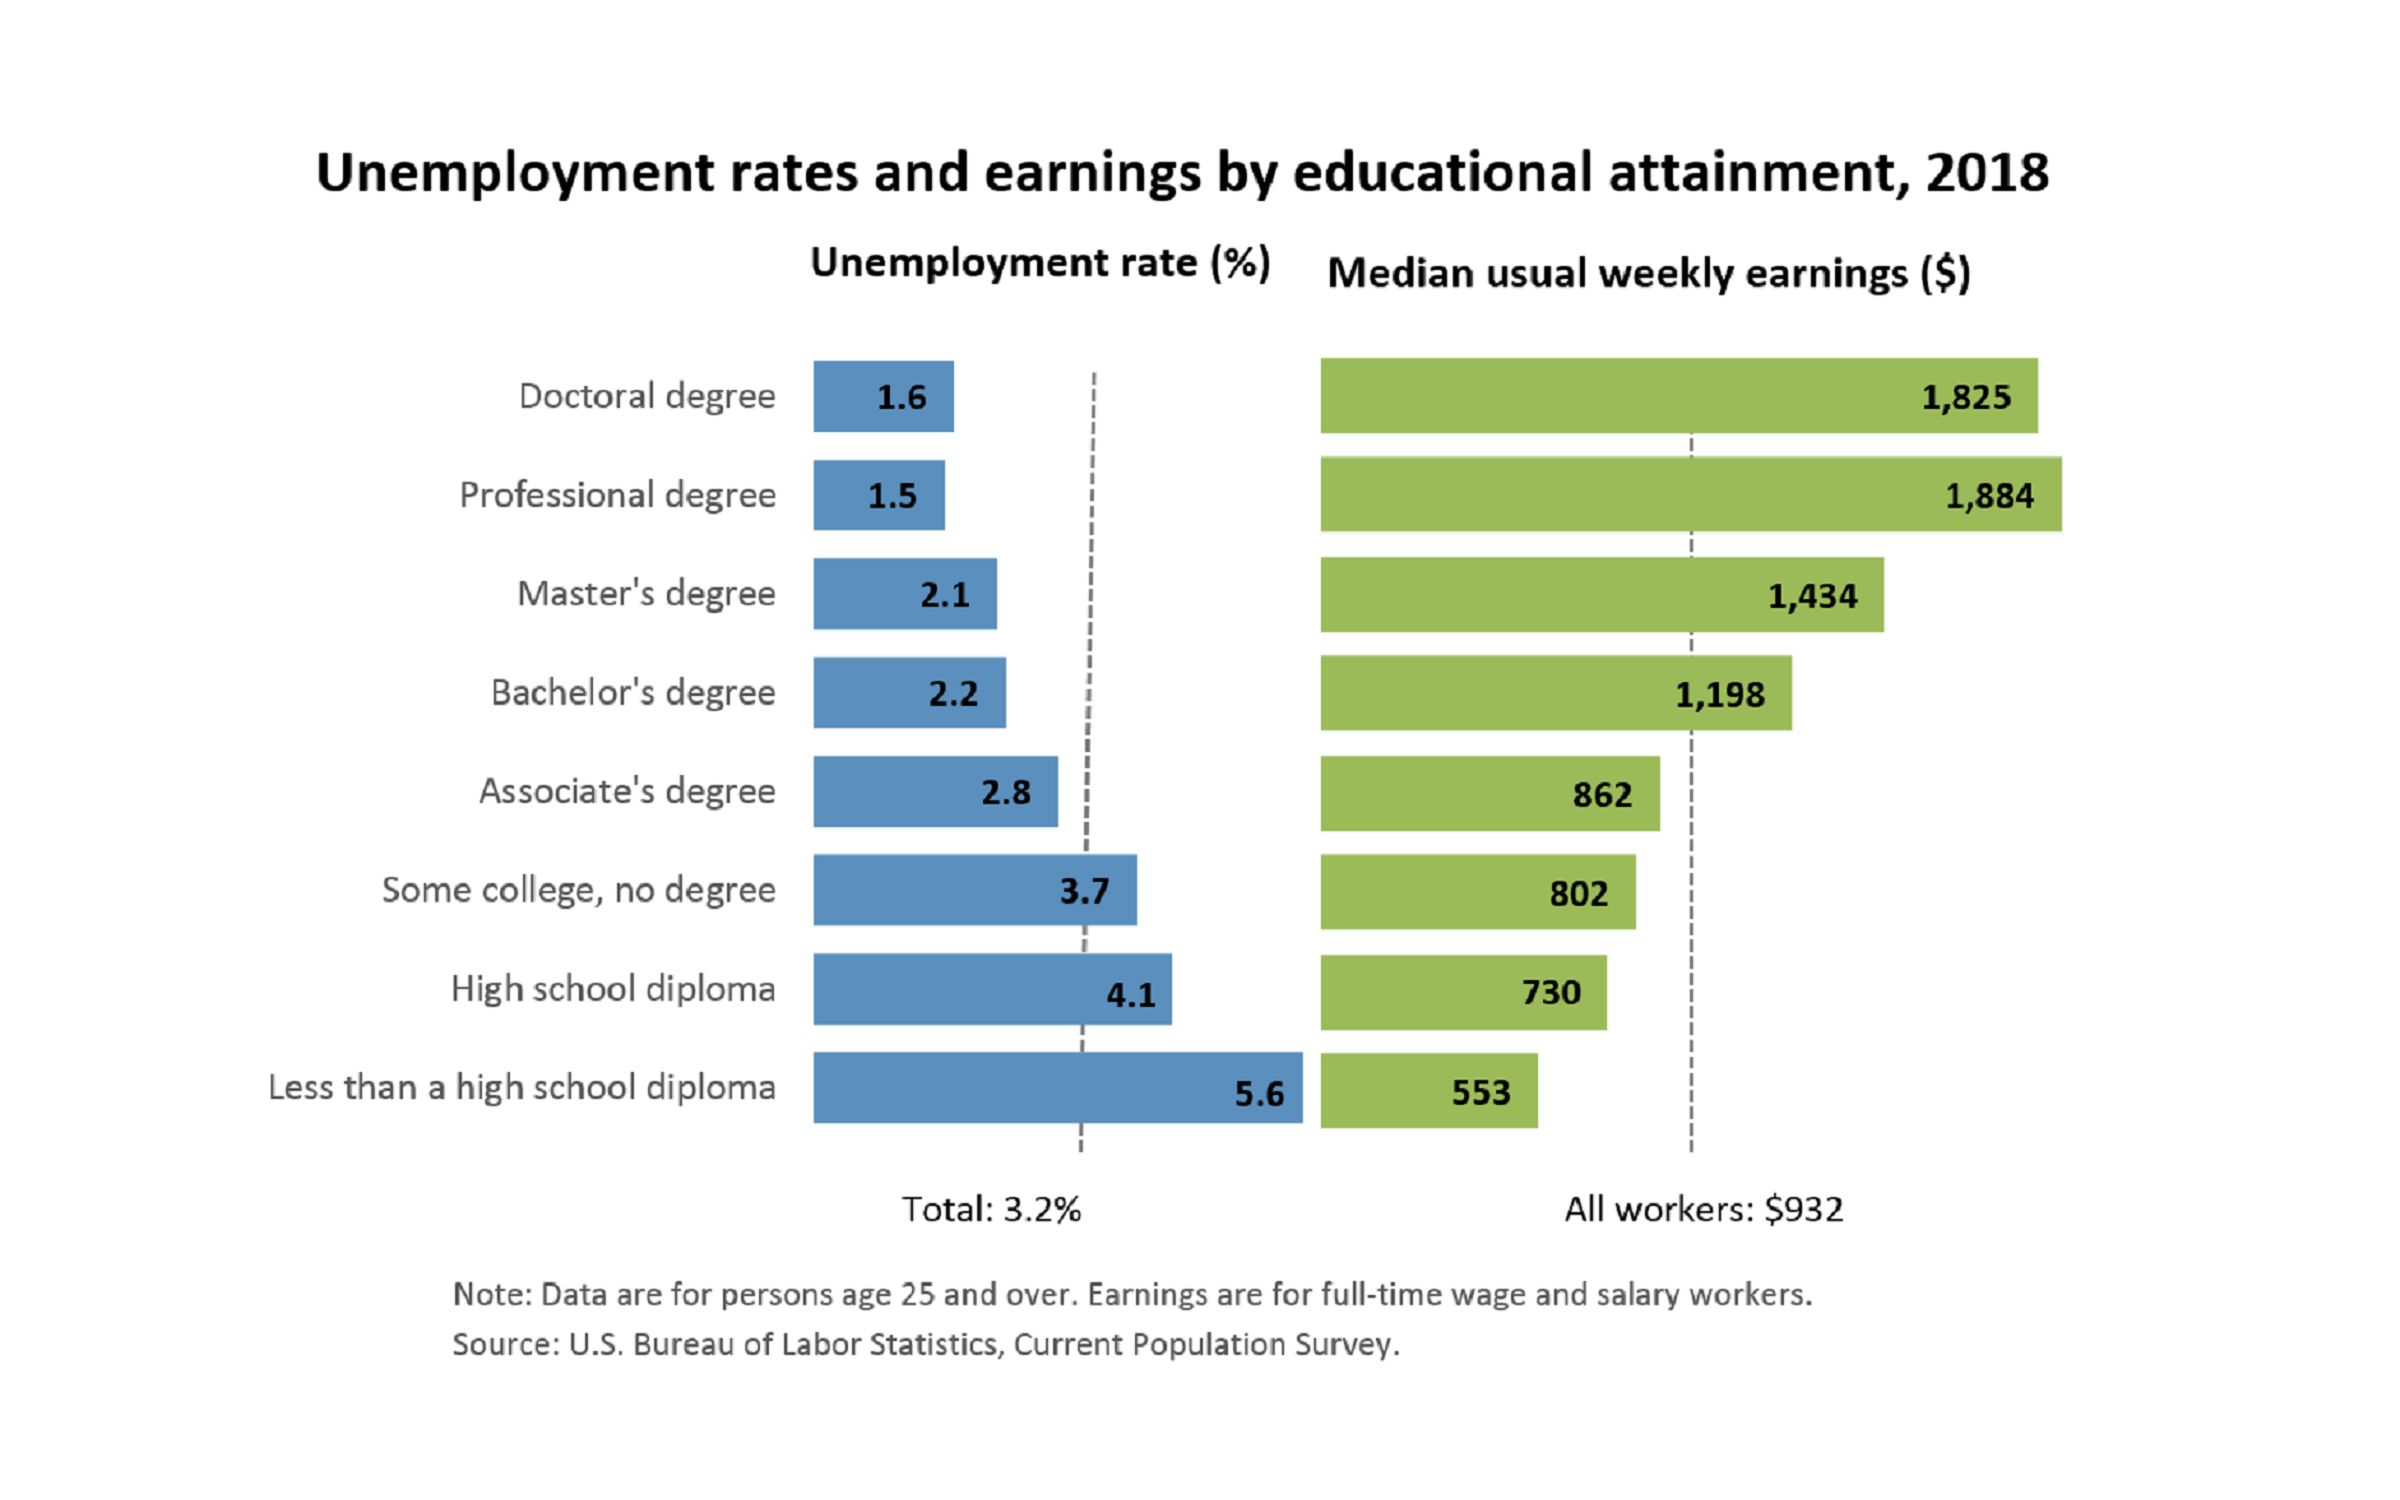 Earnings and unemployment rate by education degree